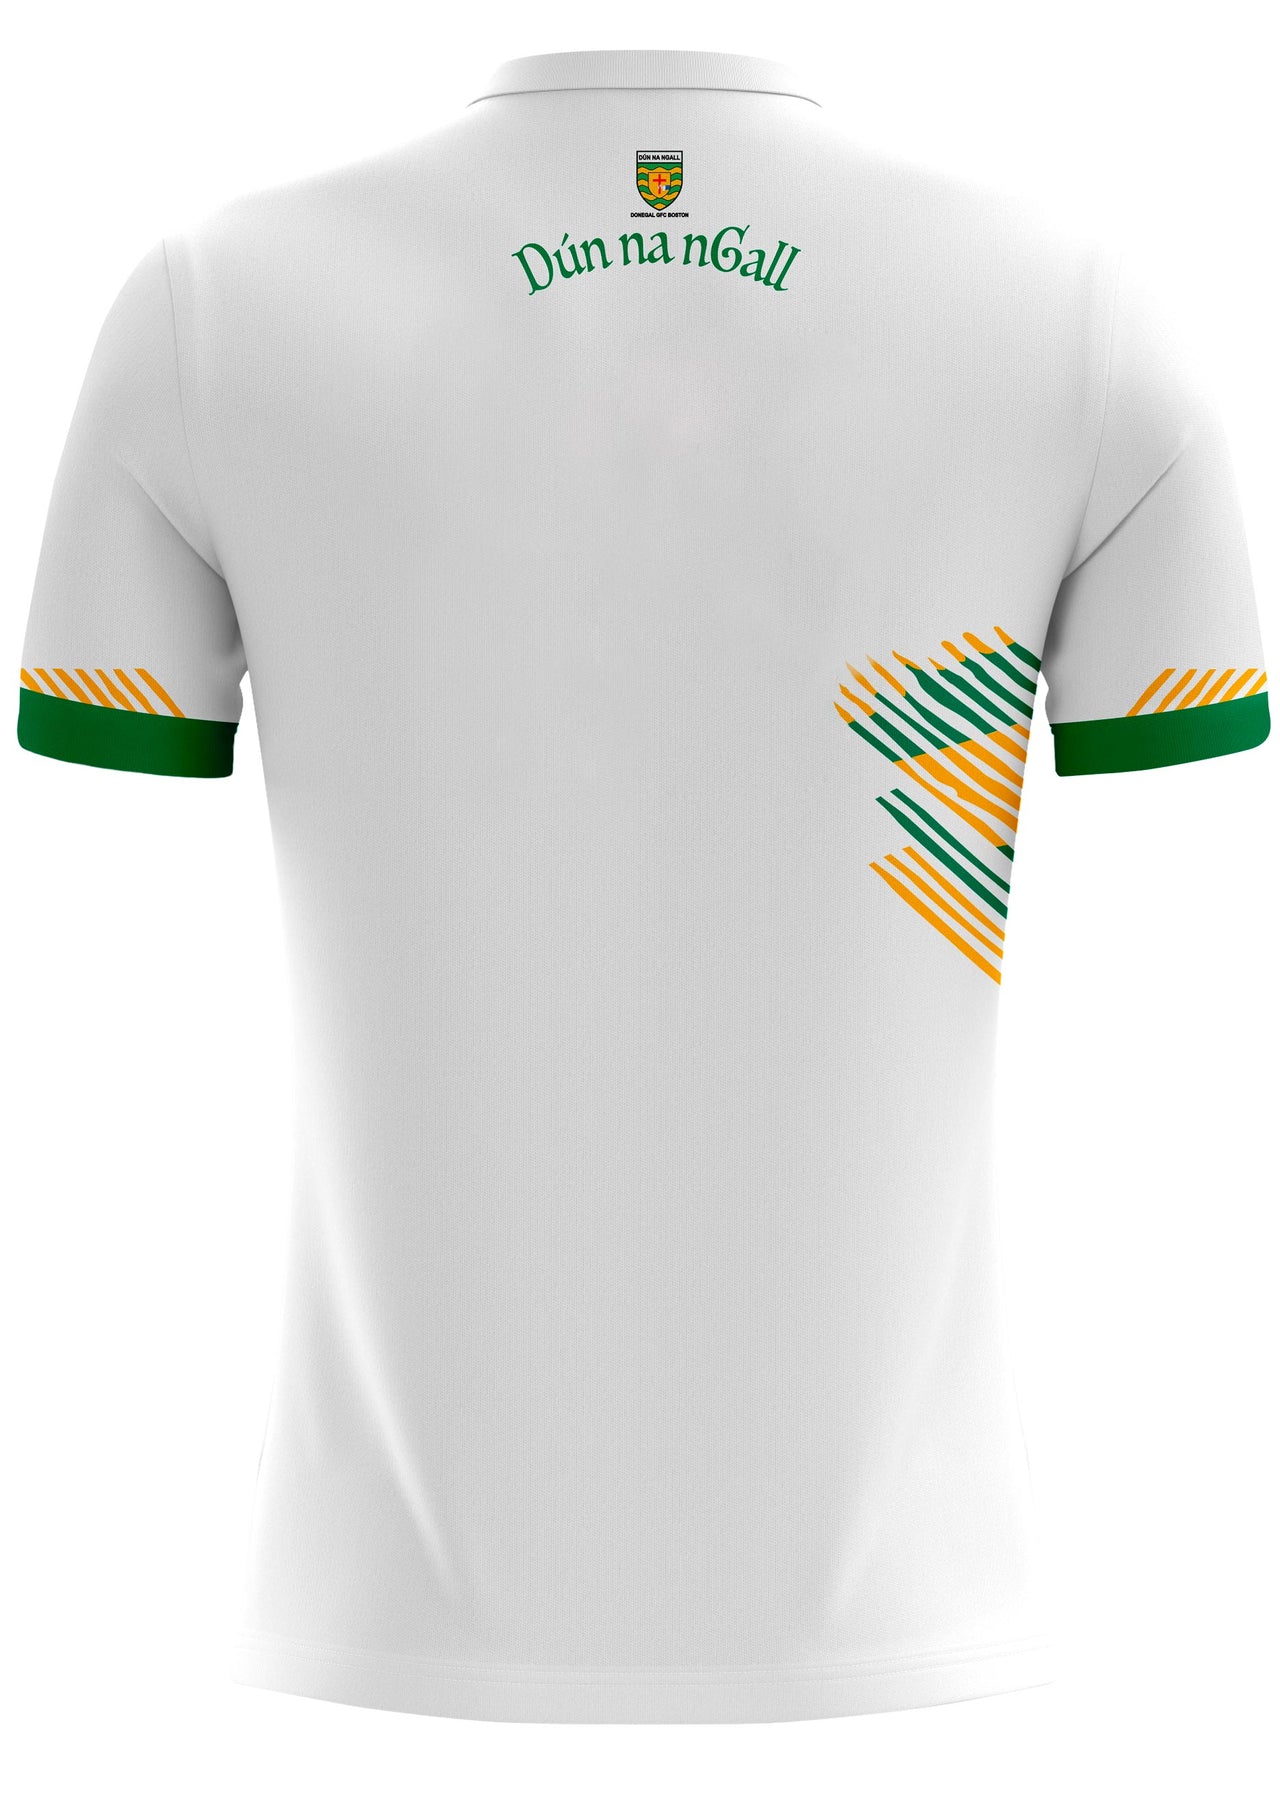 Donegal Boston Away Jersey Player Fit Adult